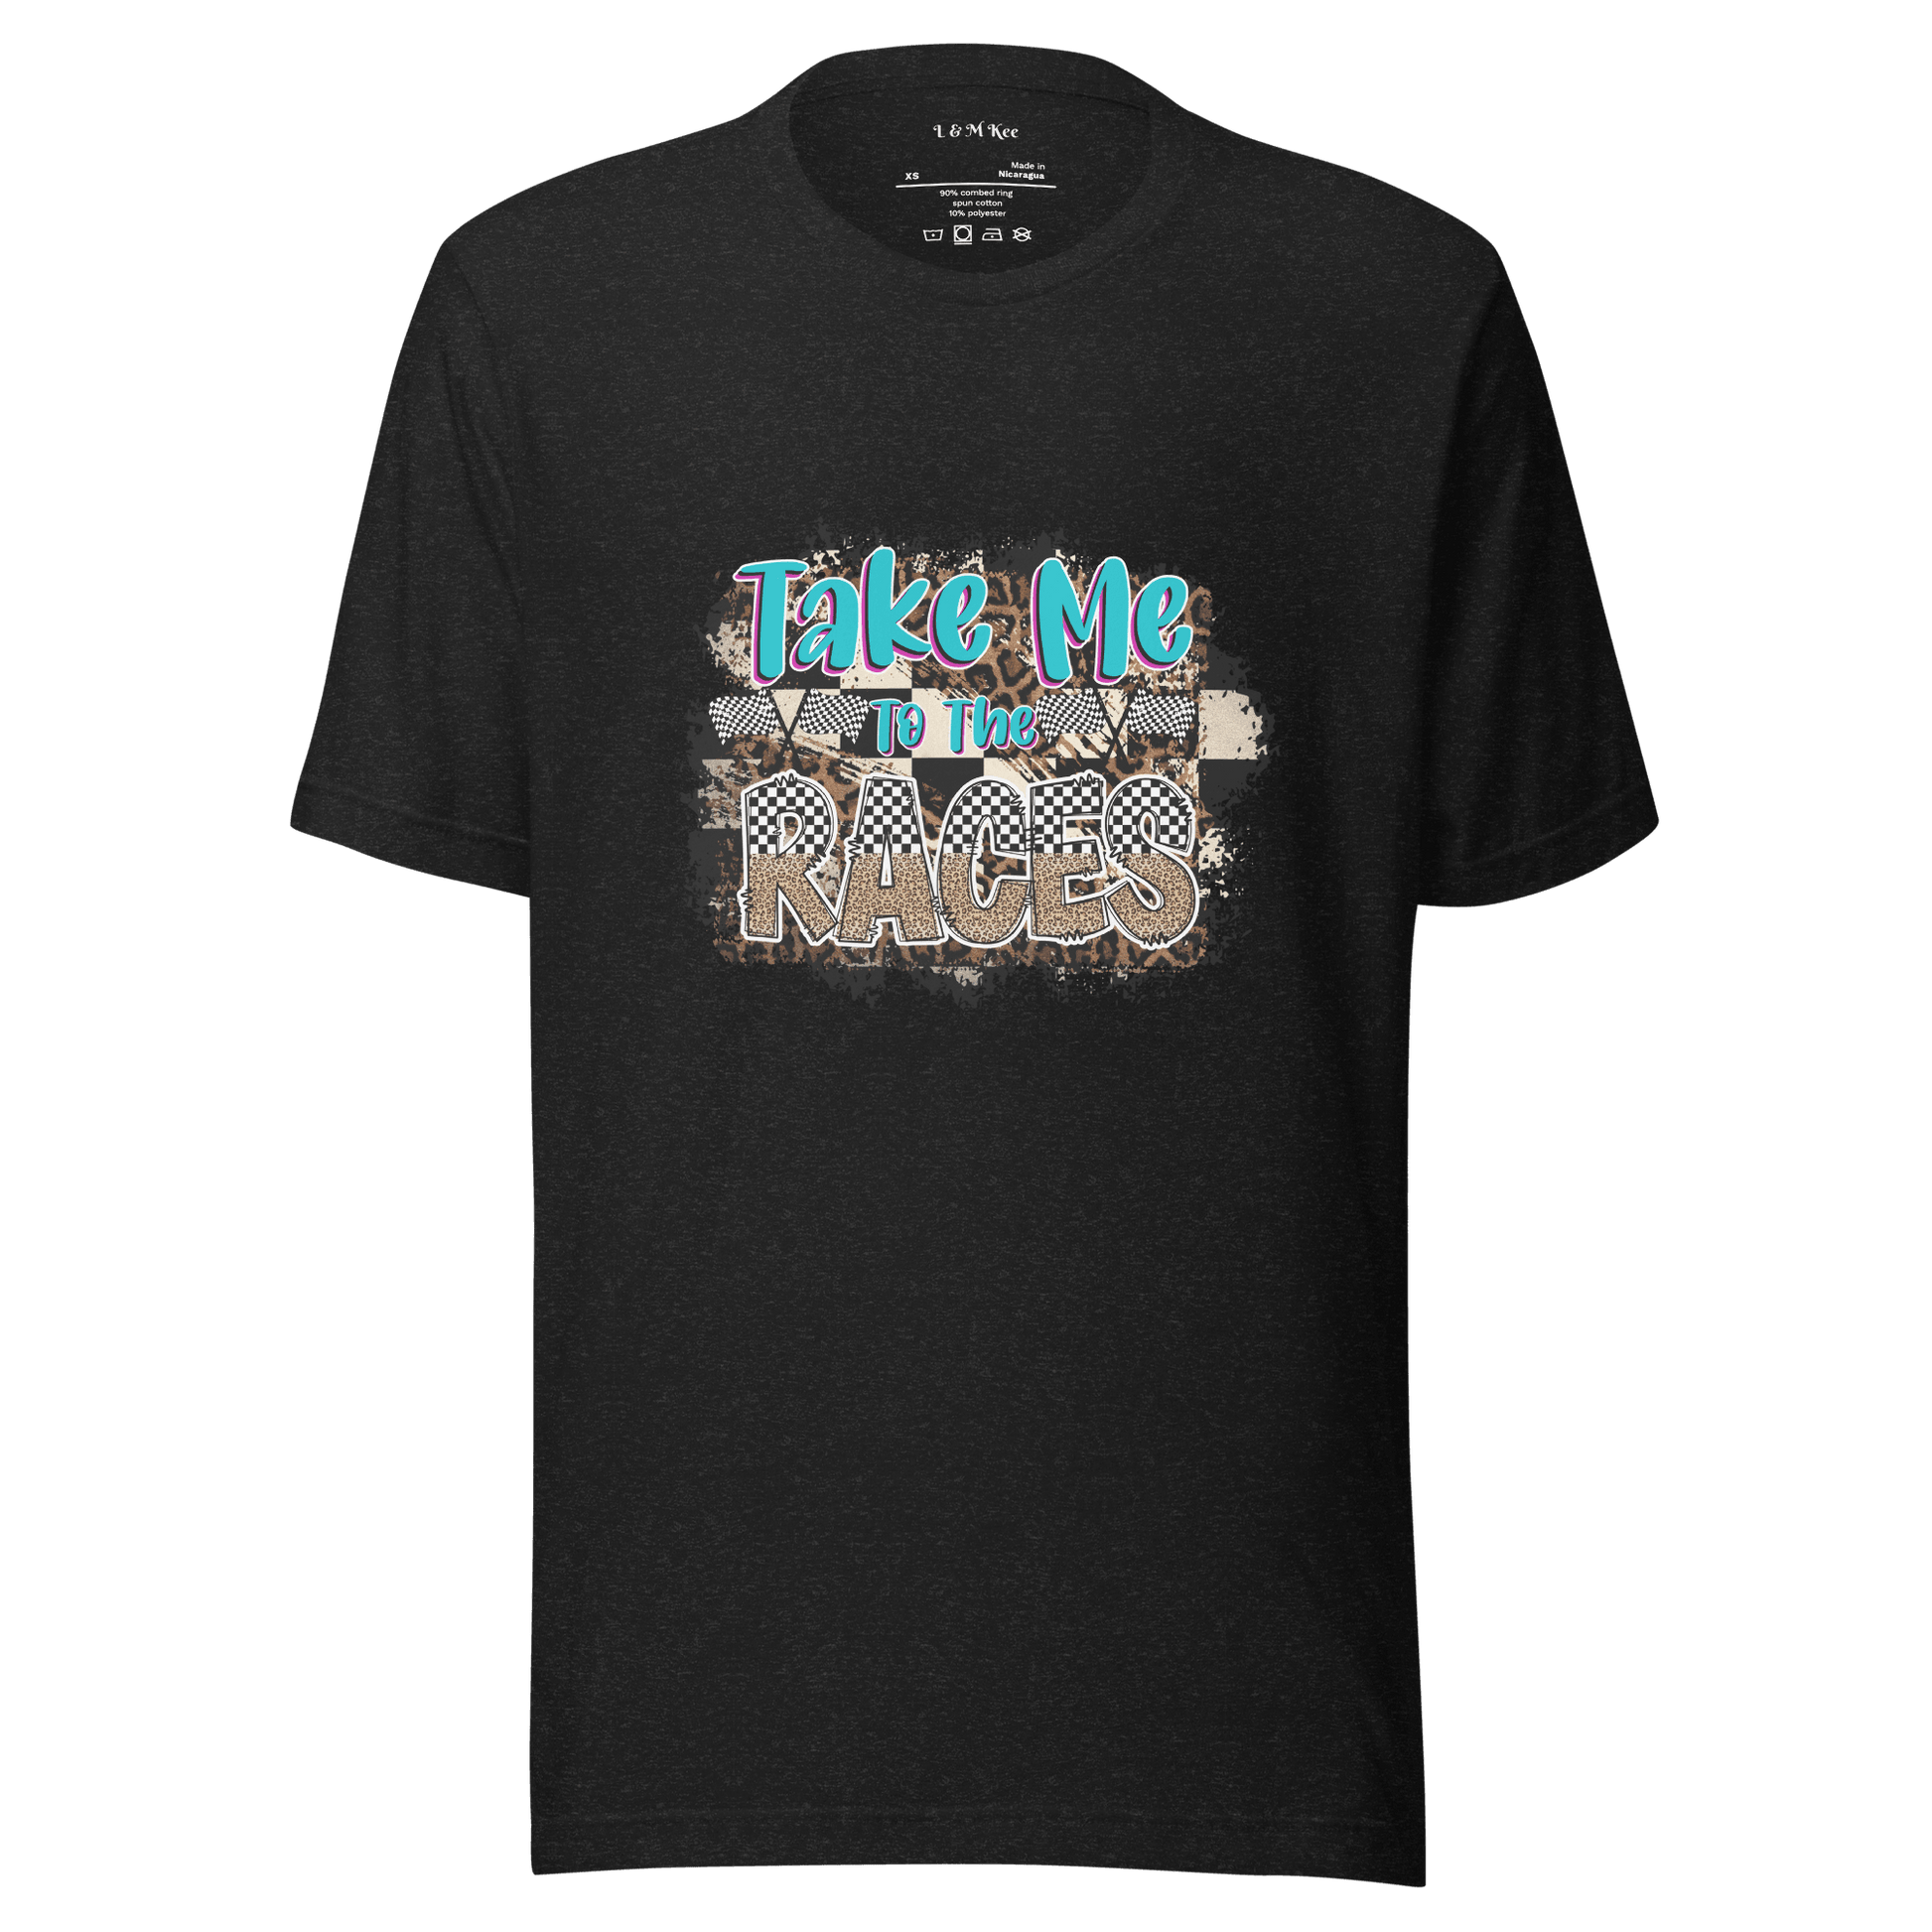 Take Me To the Races Unisex T-shirt - L & M Kee, LLC